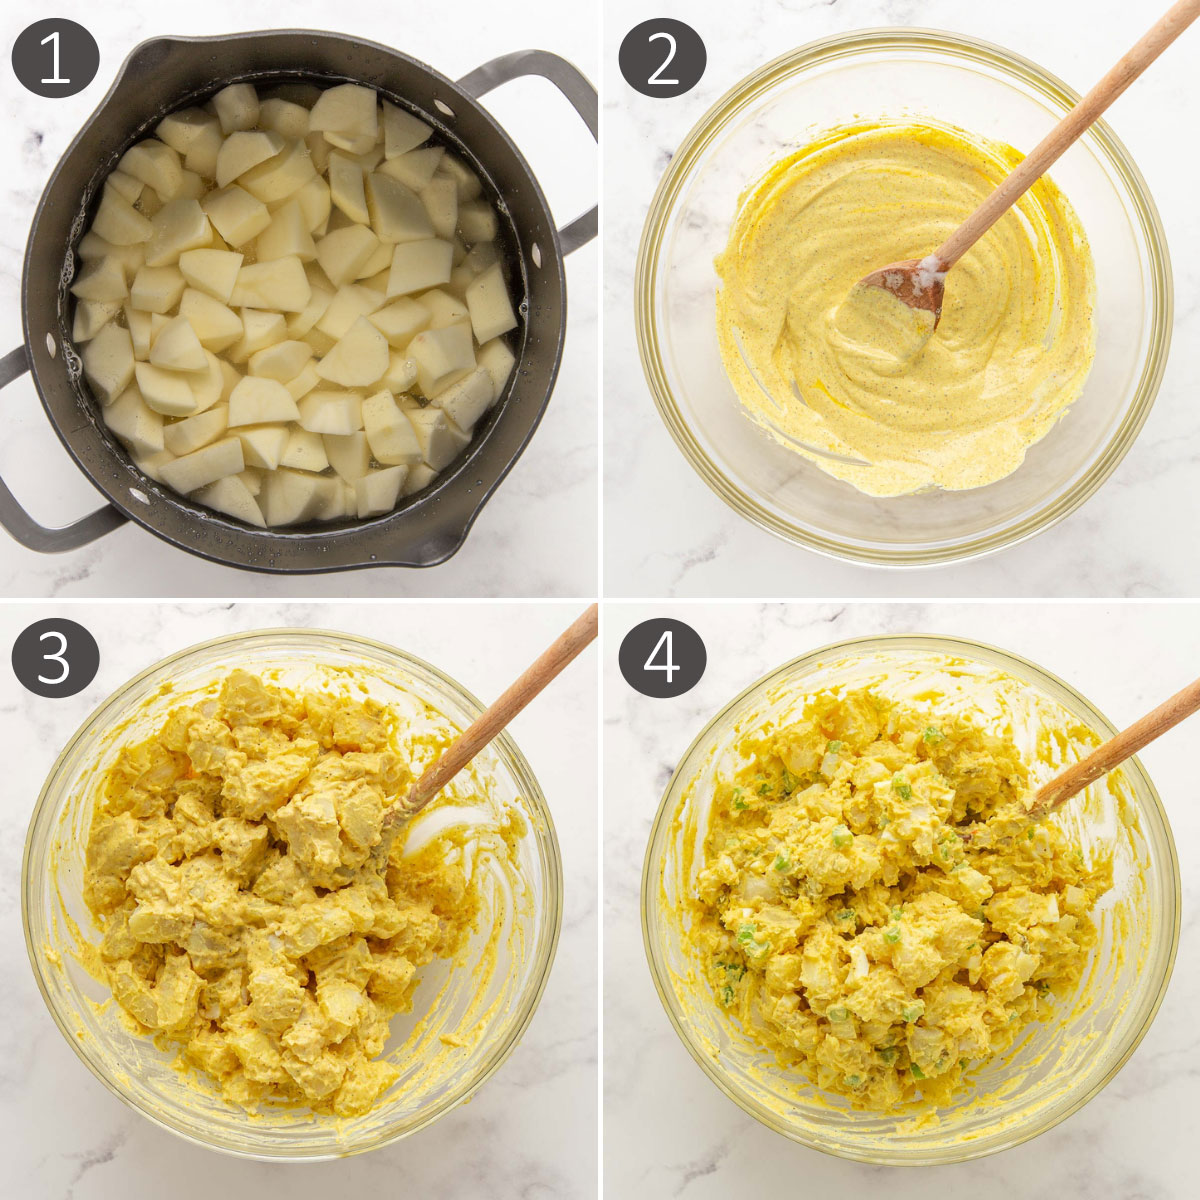 A four-image collage showing steps of making potato salad.